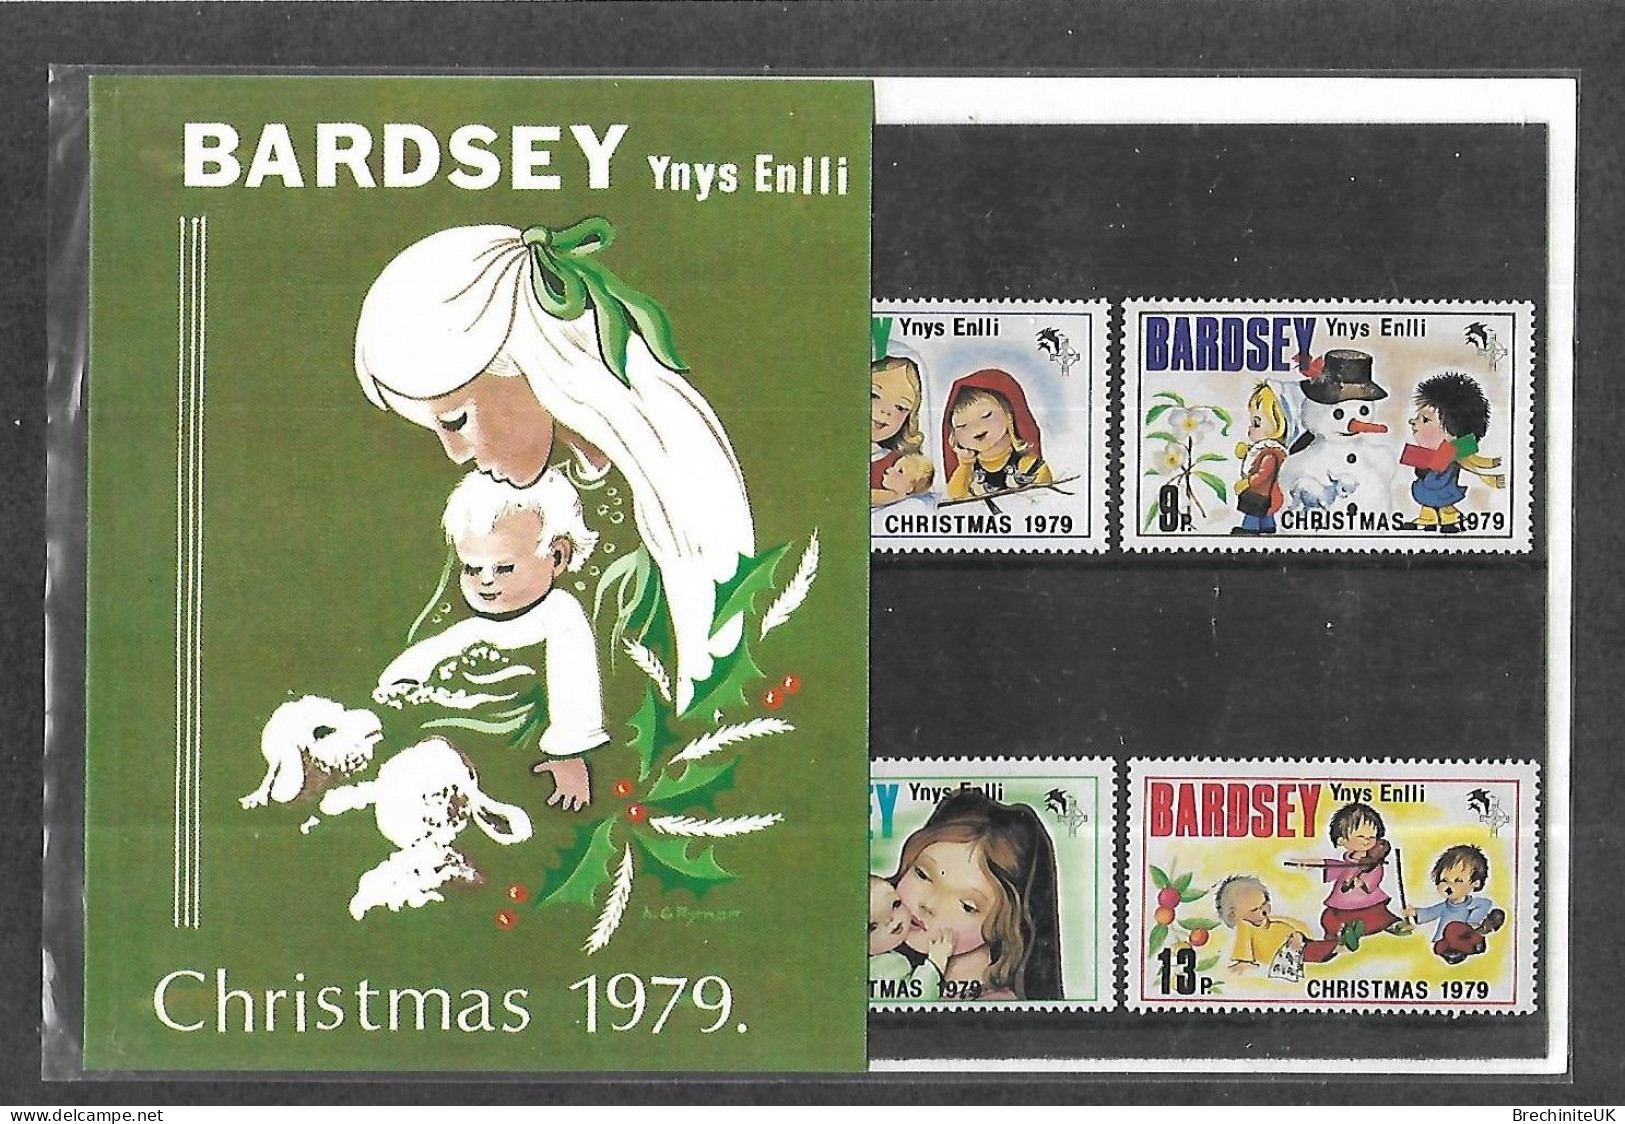 (N576) Great Britain BARDSEY ISLAND, 1979 Christmas Stamp Presentation Pack - Local Issues